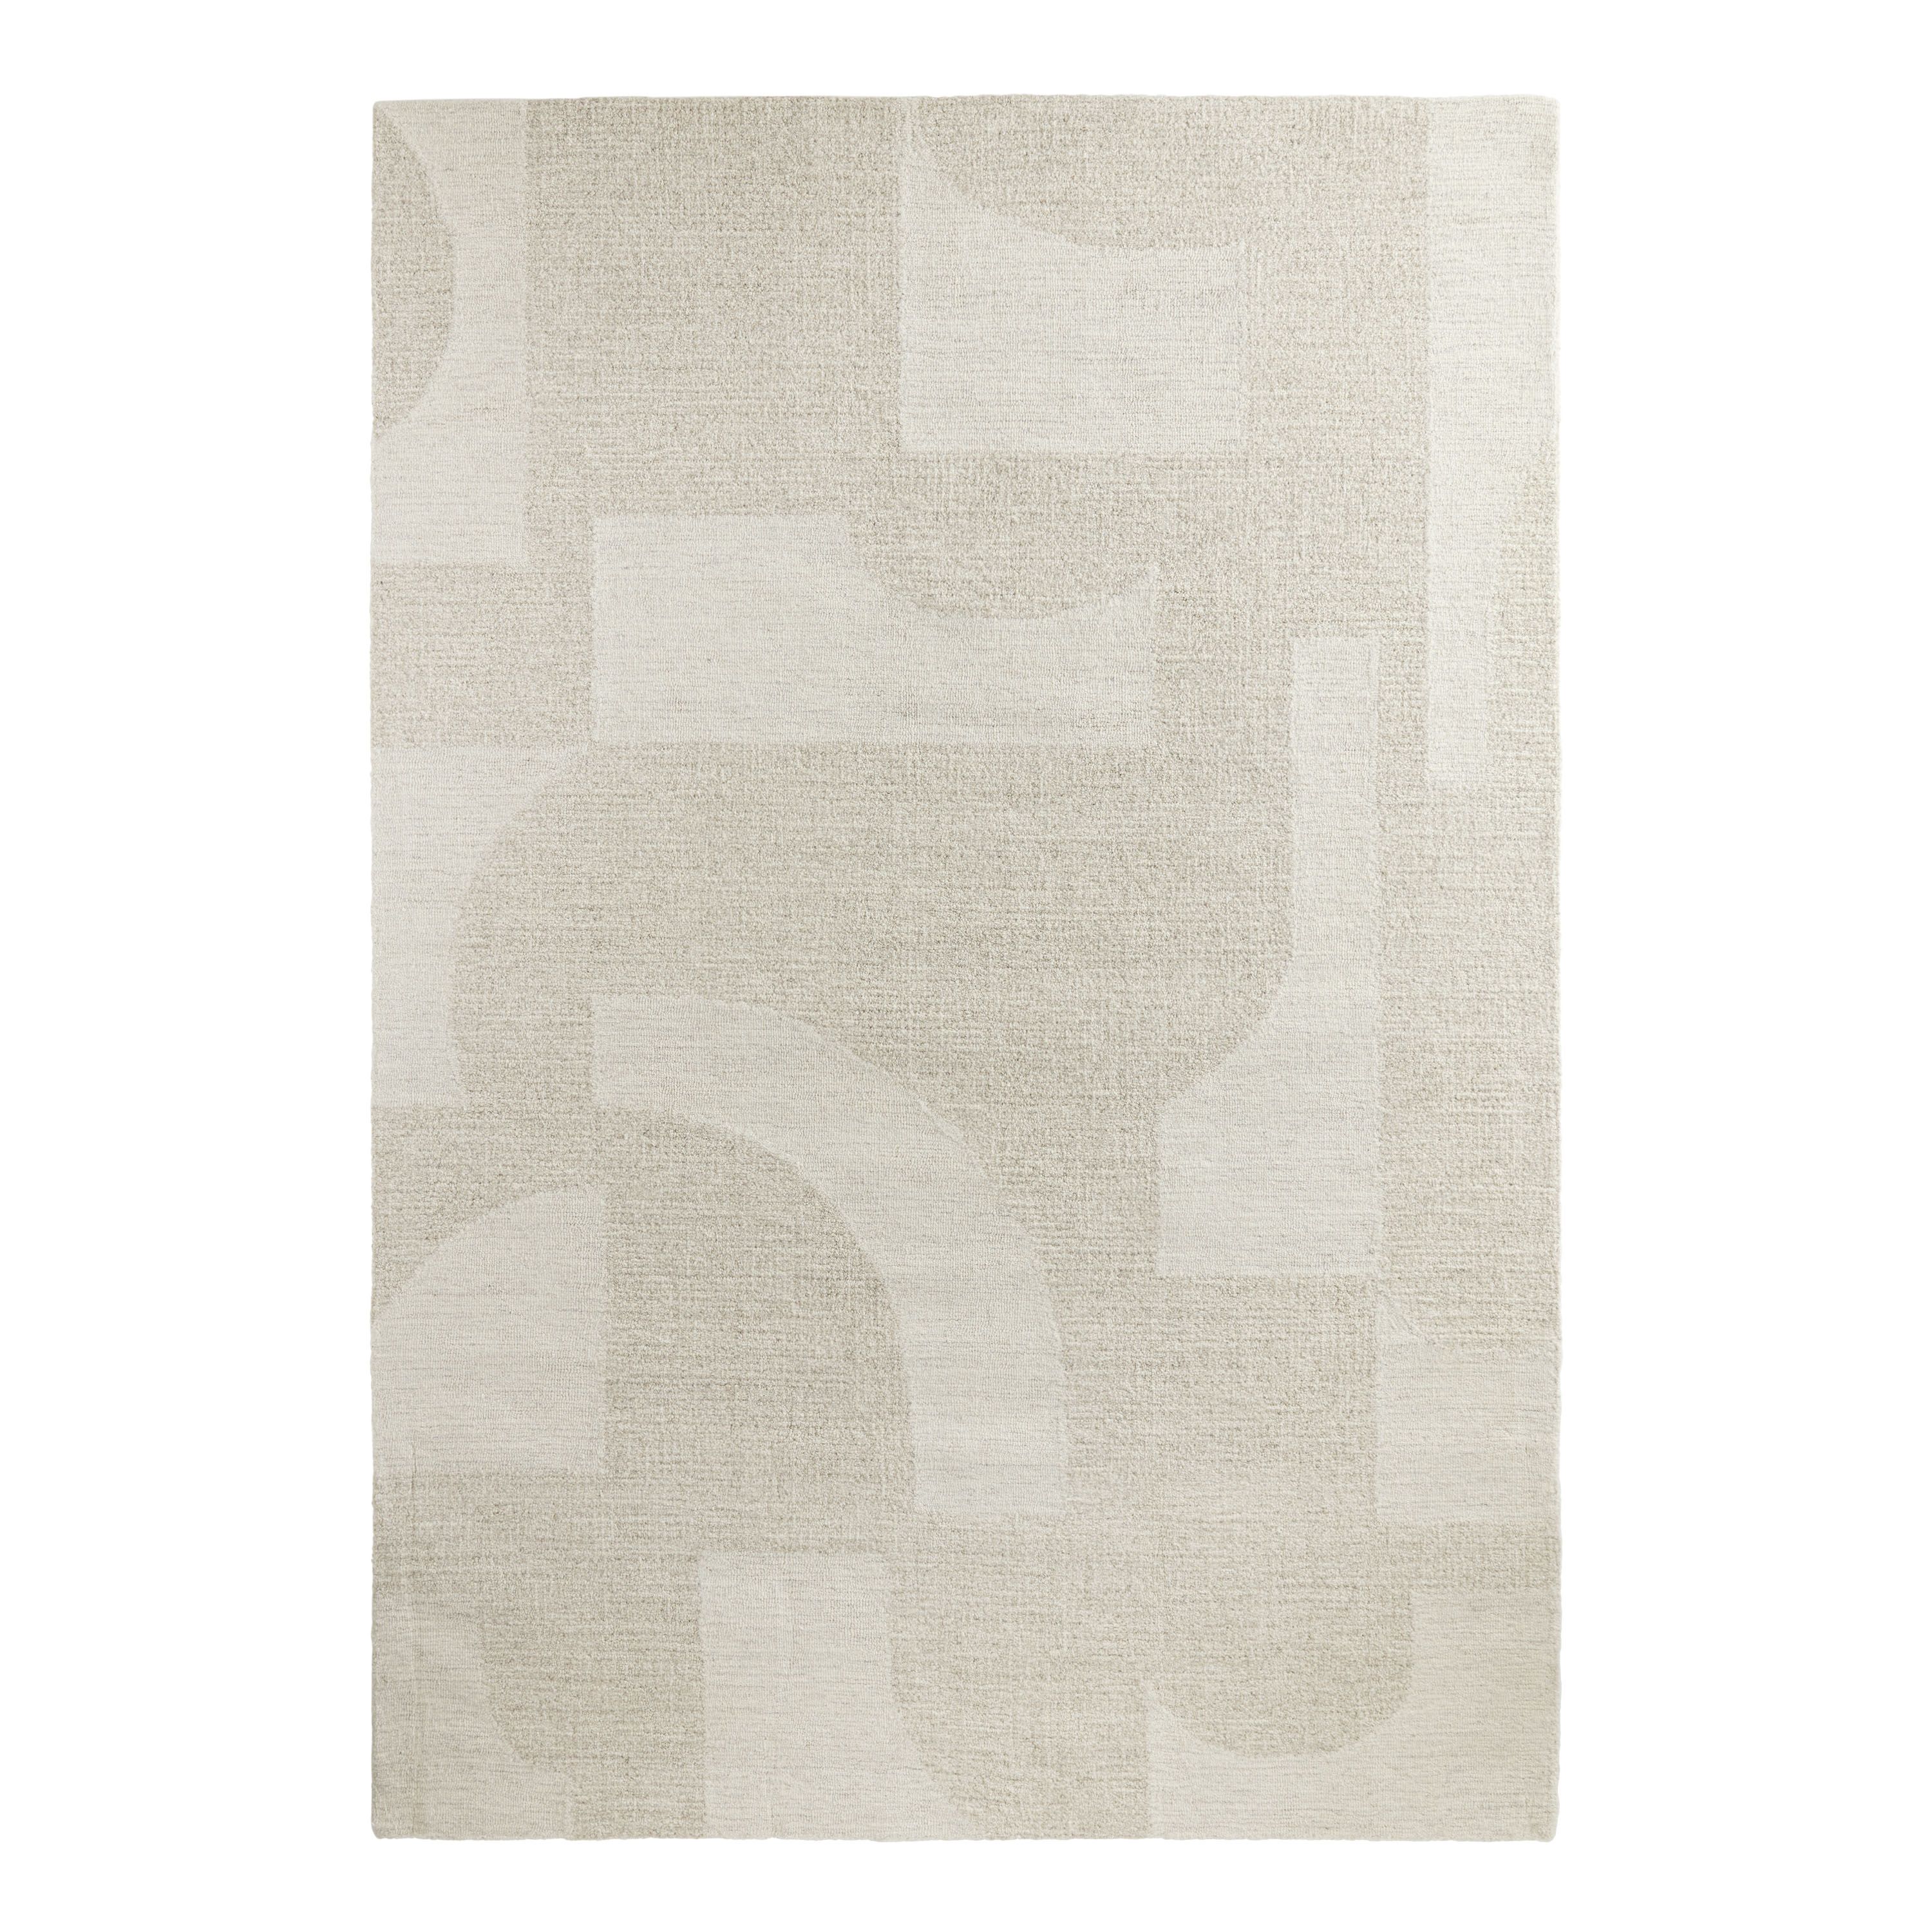 Nomad Undyed Abstract Tufted Wool Area Rug | World Market